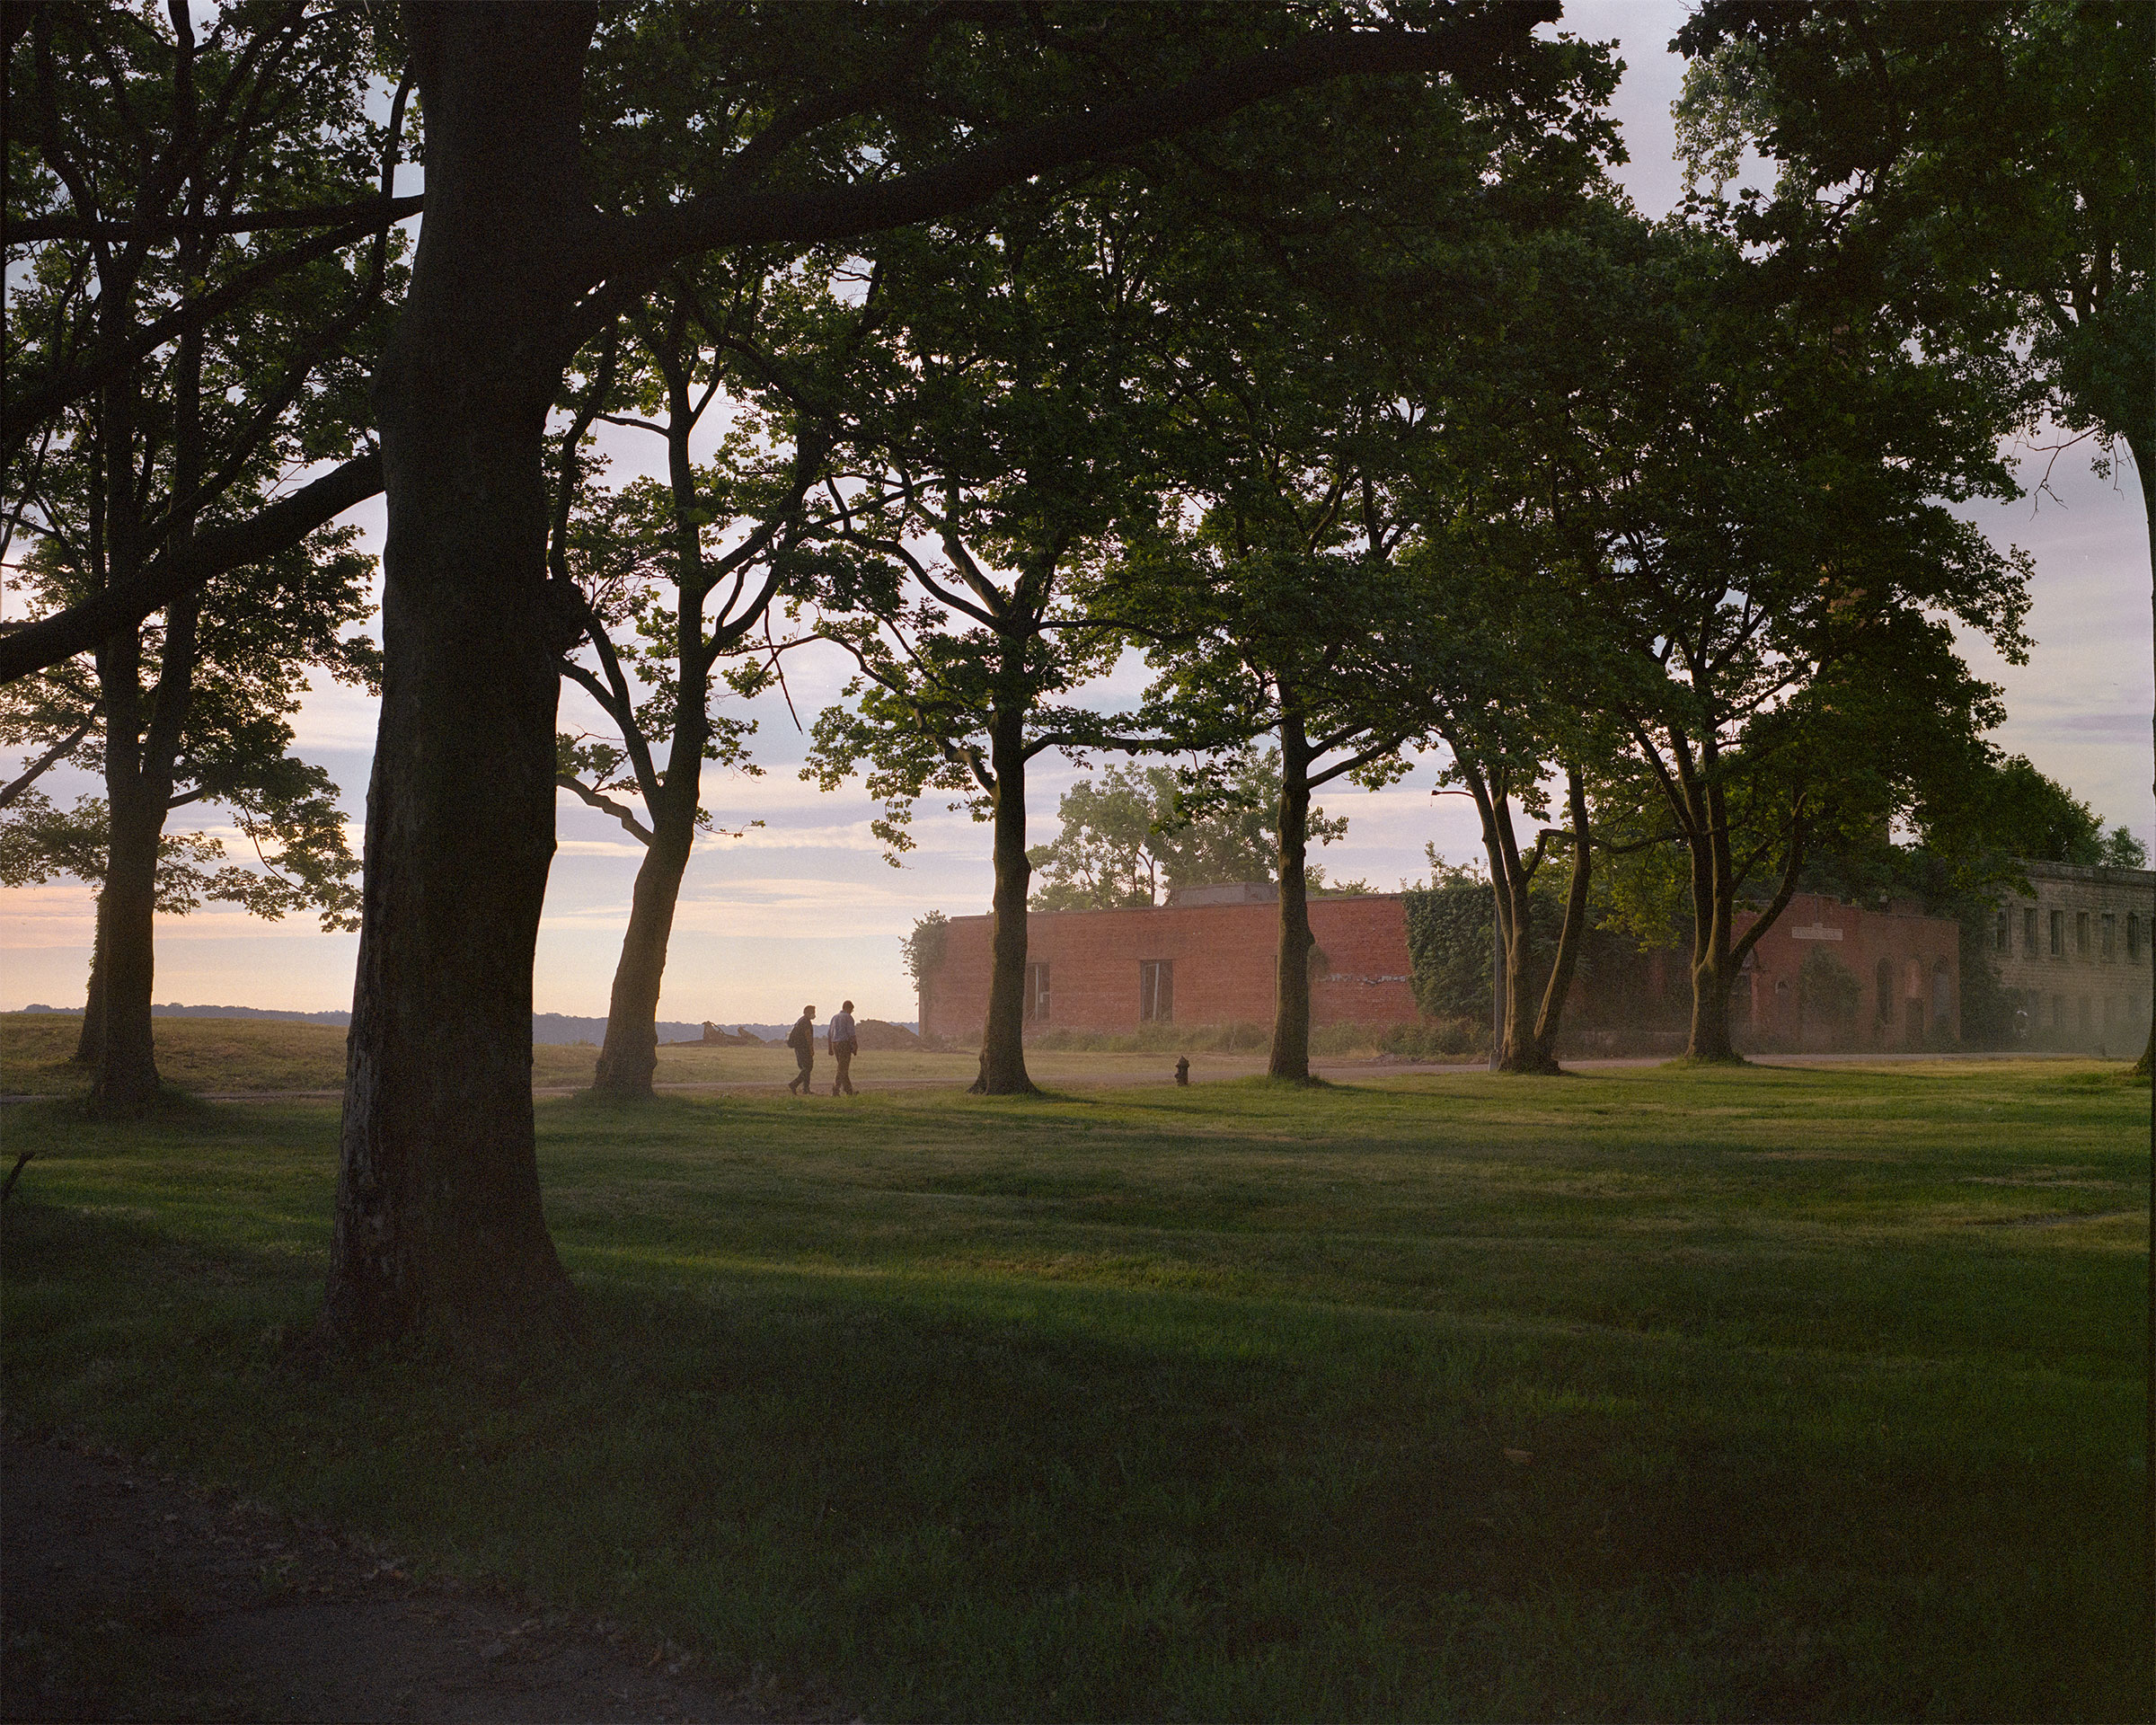 Mist gathers on the eastern shore of Hart Island, the city's "potters field," on June 26, 2020. (Sasha Arutyunova for TIME)